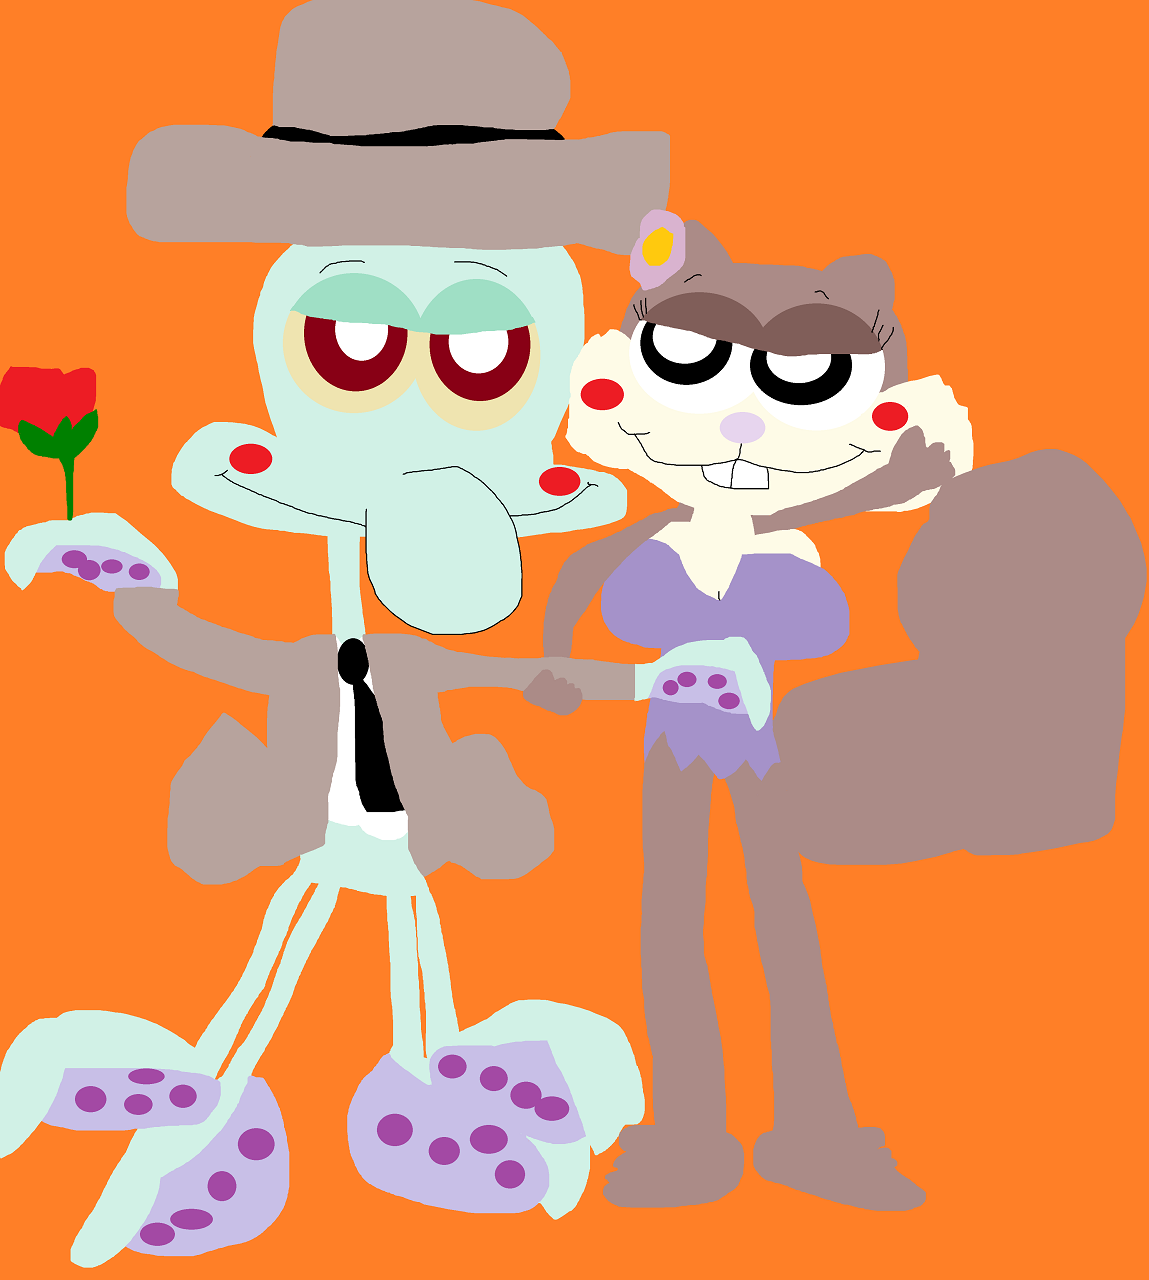 Squid Noir Squidward With A Rose For Sandy by Falconlobo